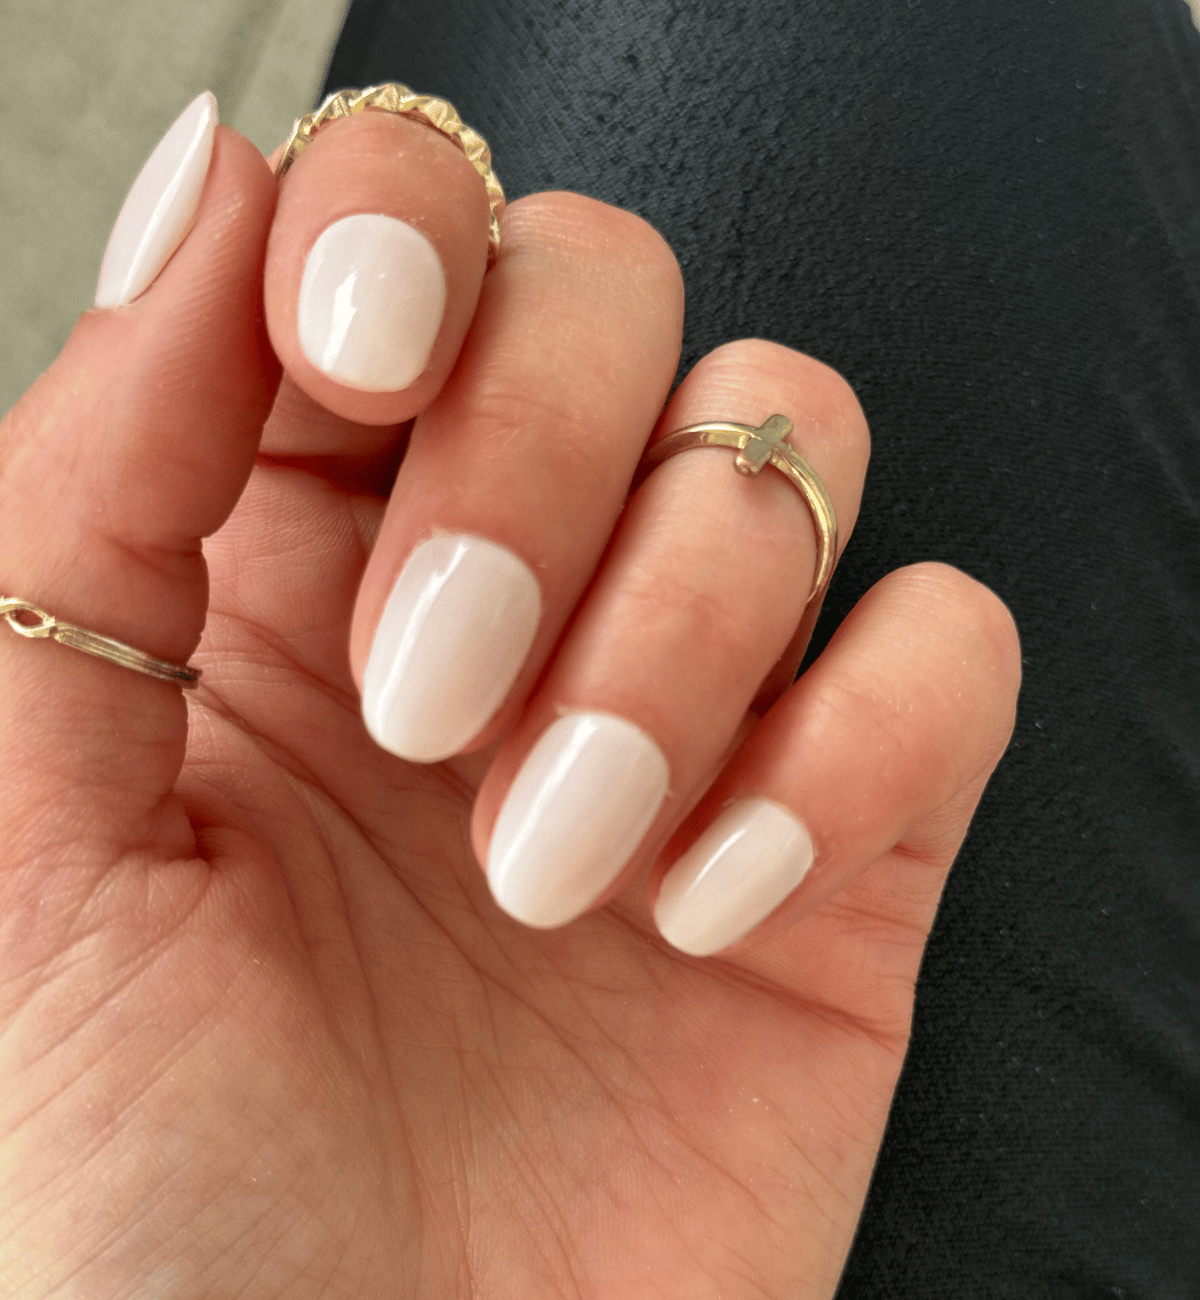 FAUX ONGLES CREAMY ARRONDIS COURTS